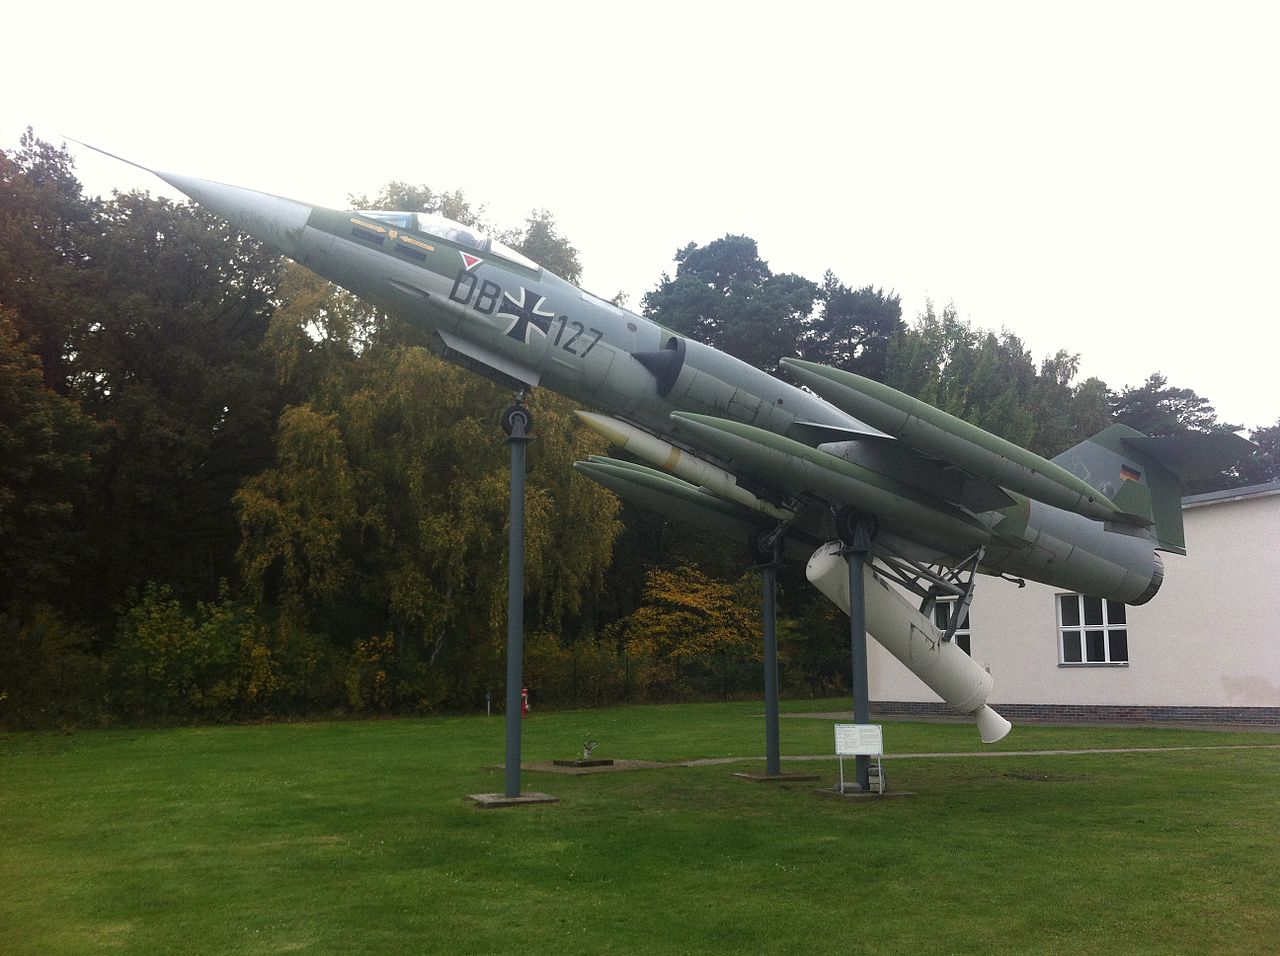 German Air Force F-104G Starfighter equipped with rocket booster for Zero Length Launch. A B43 nuclear bomb is on the centerline hardpoint. (MoRsE via Wikipedia)